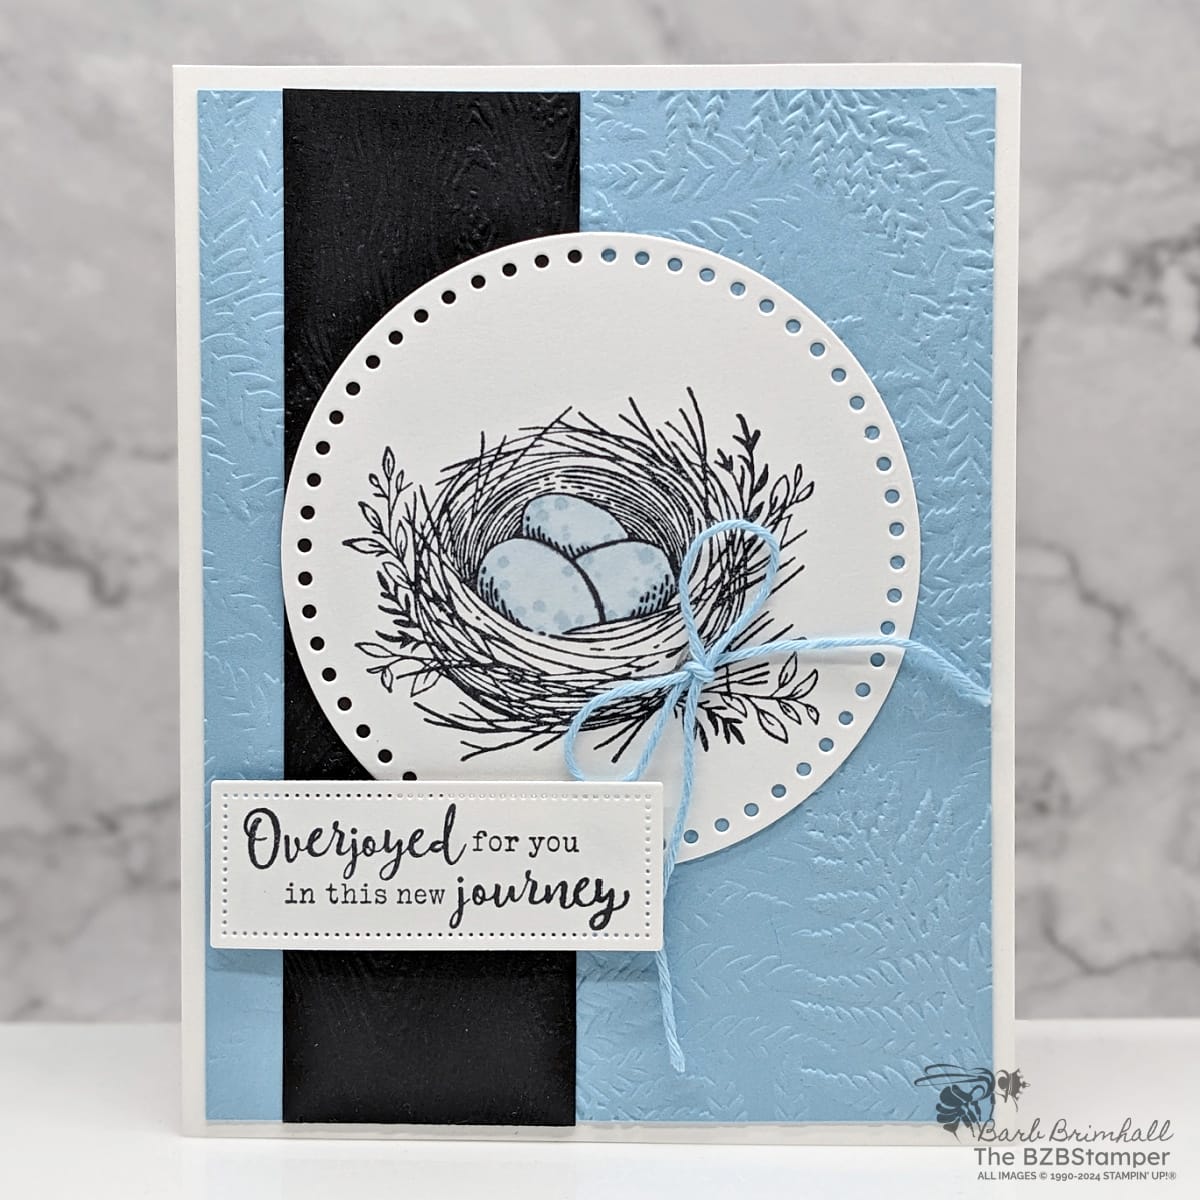 Baby Card using the Everyday Details Stamp Set featuring a nest with blue eggs, blue background and a sentiment of "overjoyed for you in this new journey."